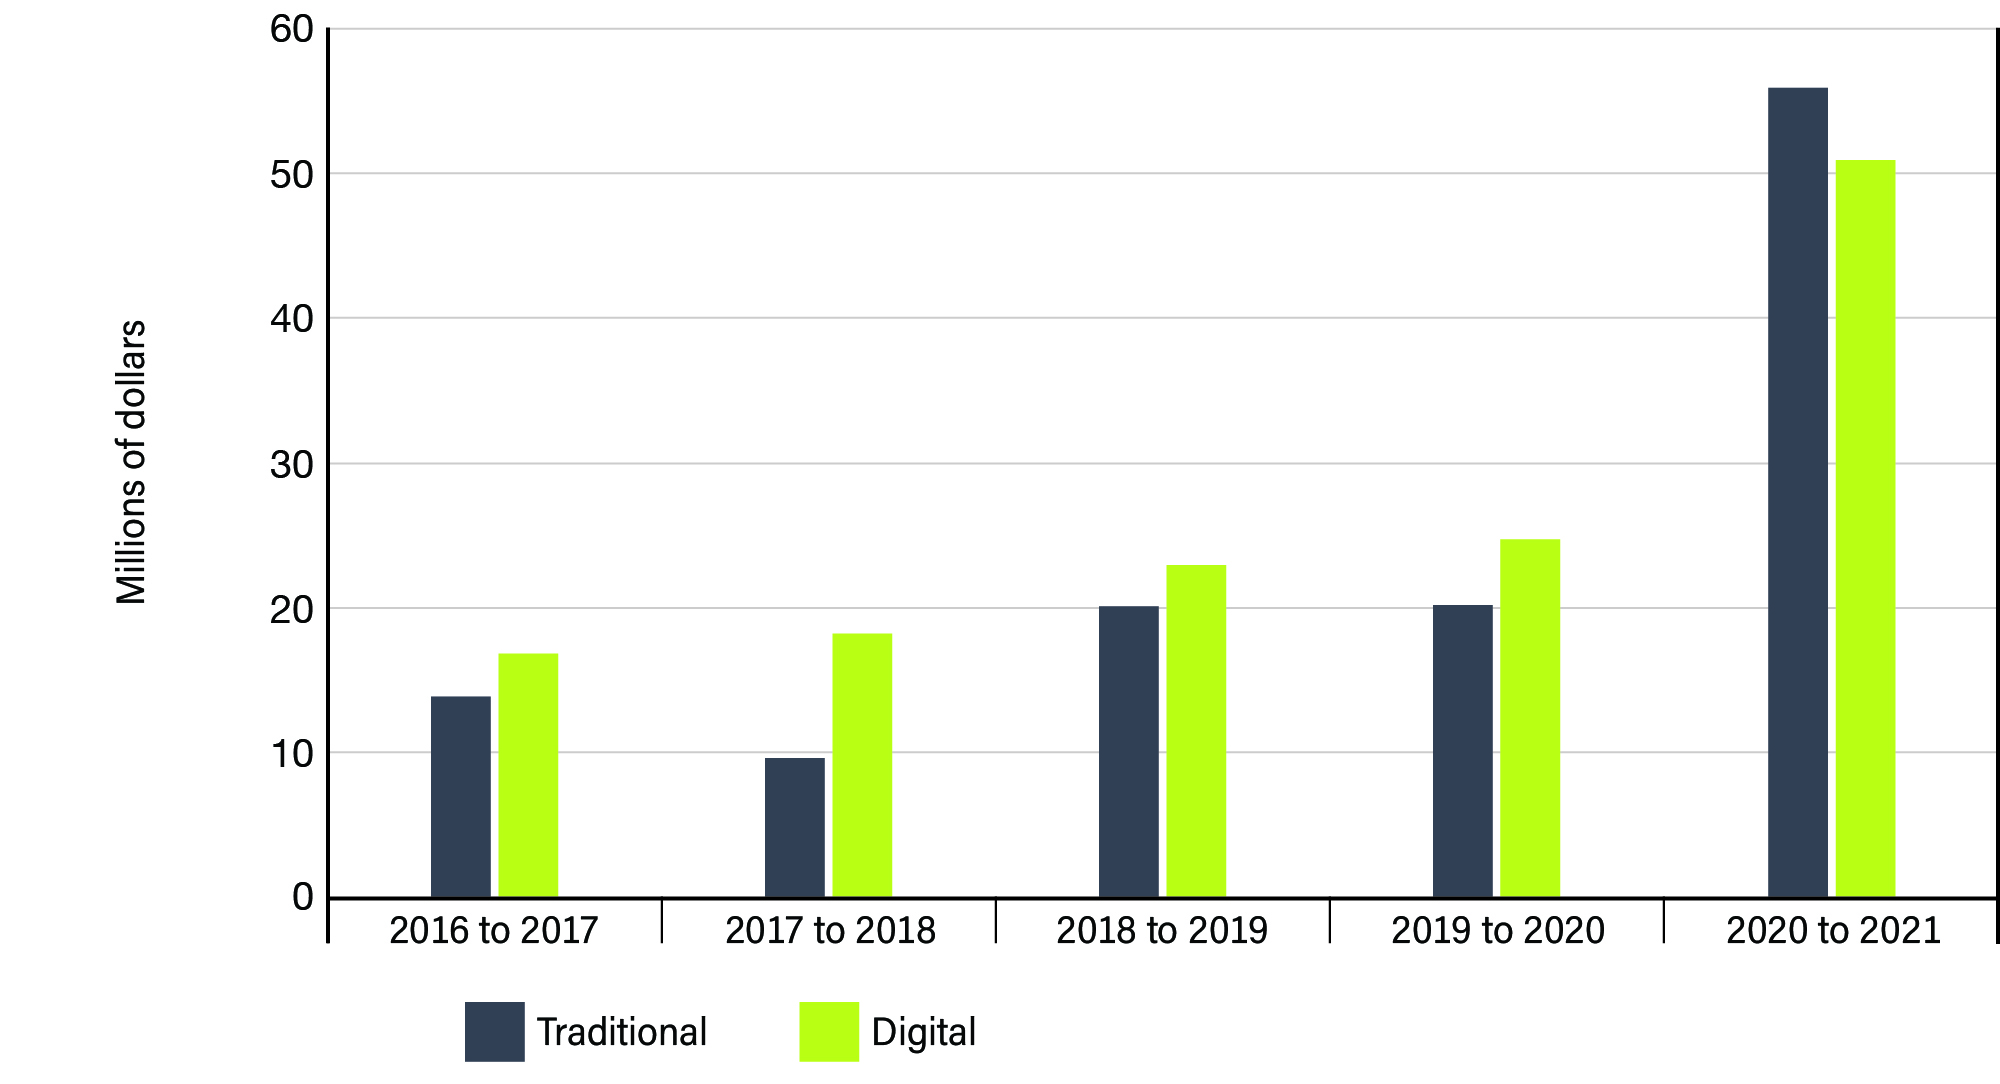 Figure 3: Bar graph displaying media expenditures over 5 years - See image description below.